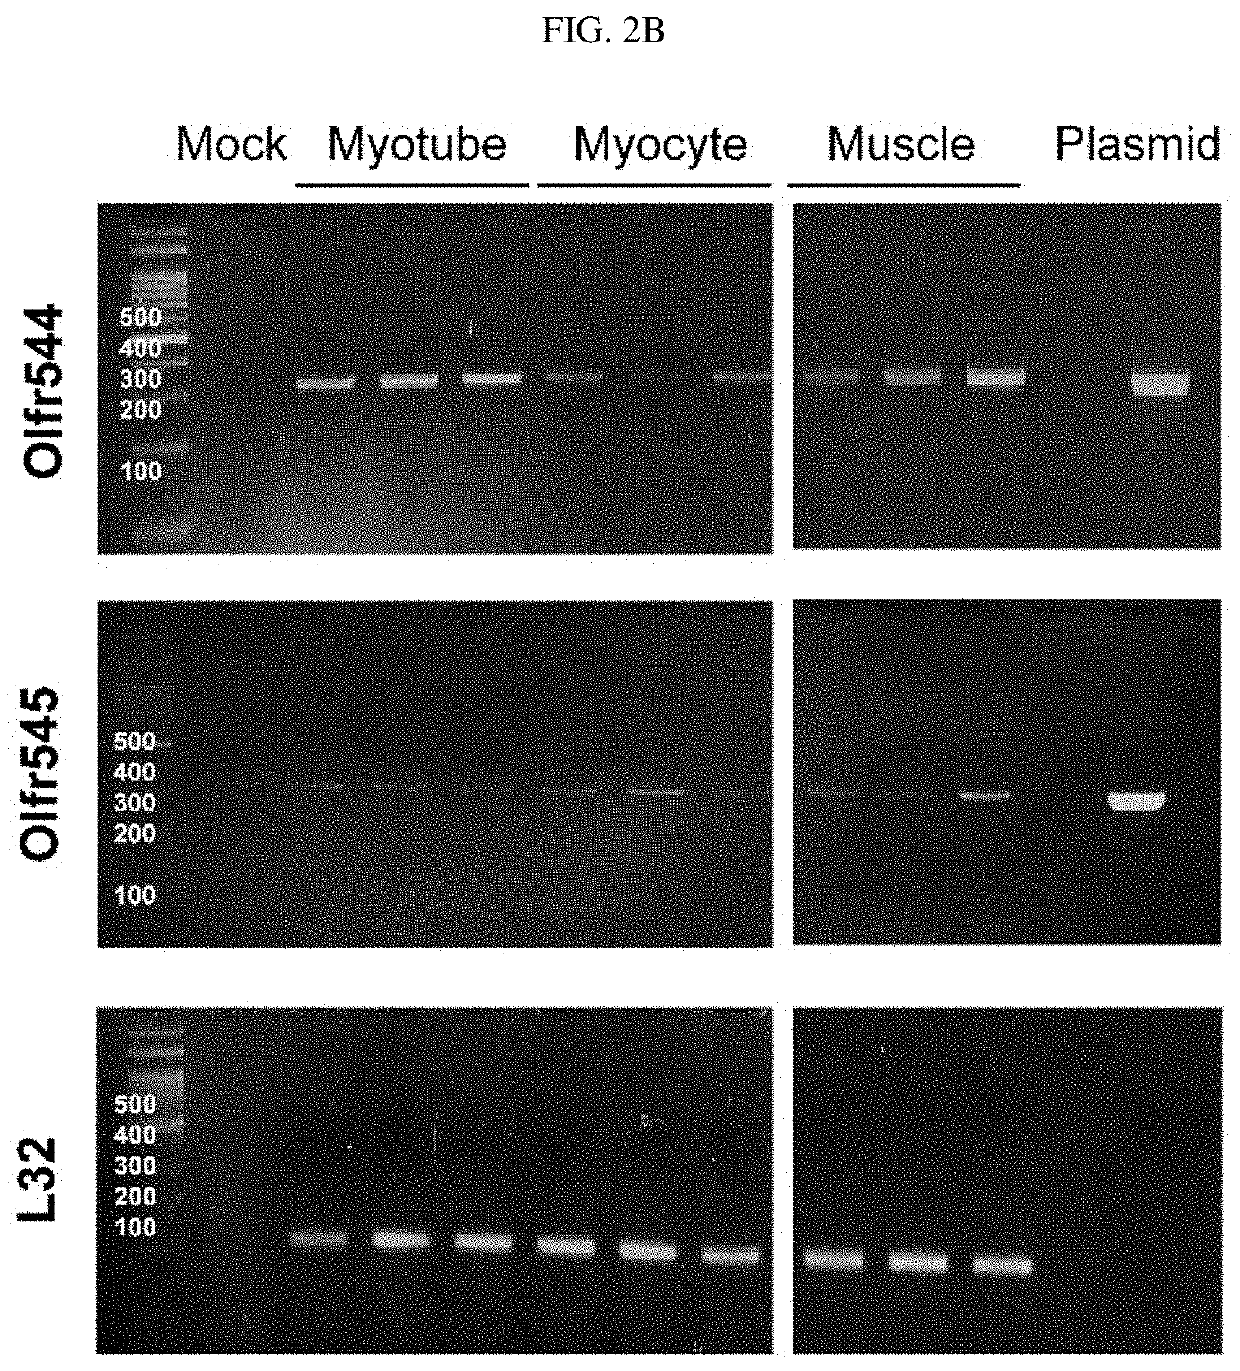 Composition for promoting skeletal muscle activity via induction of mitochondrial biogenesis comprising of azelaic acid as an active ingredient